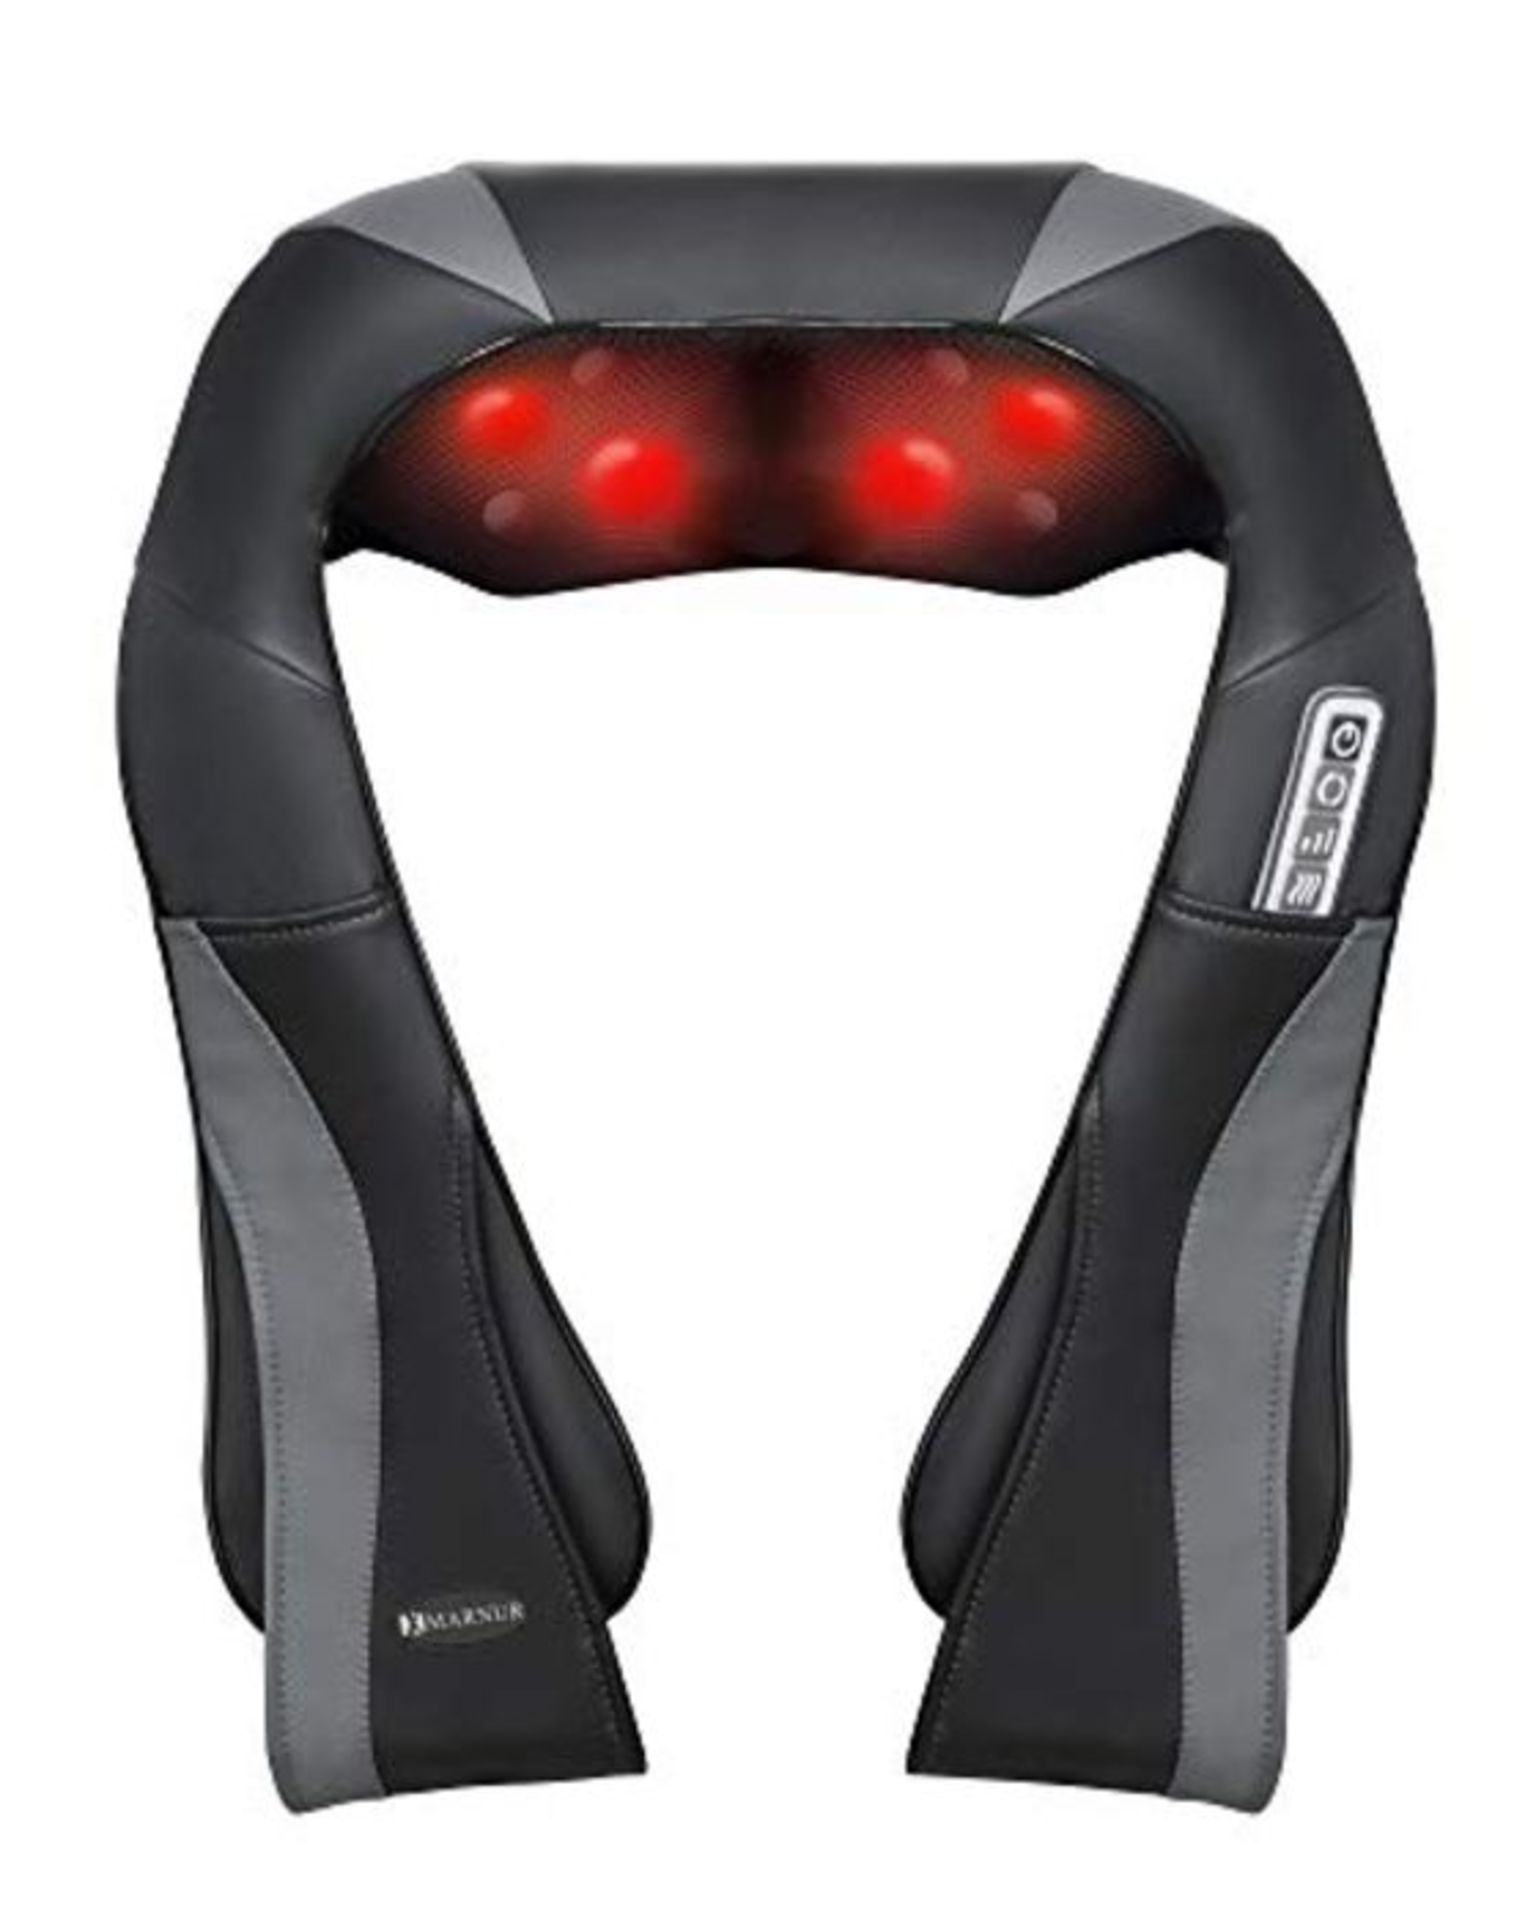 Shiatsu Neck Shoulder Massager for Back with Heat Function, Electric Massage with 3 Sp